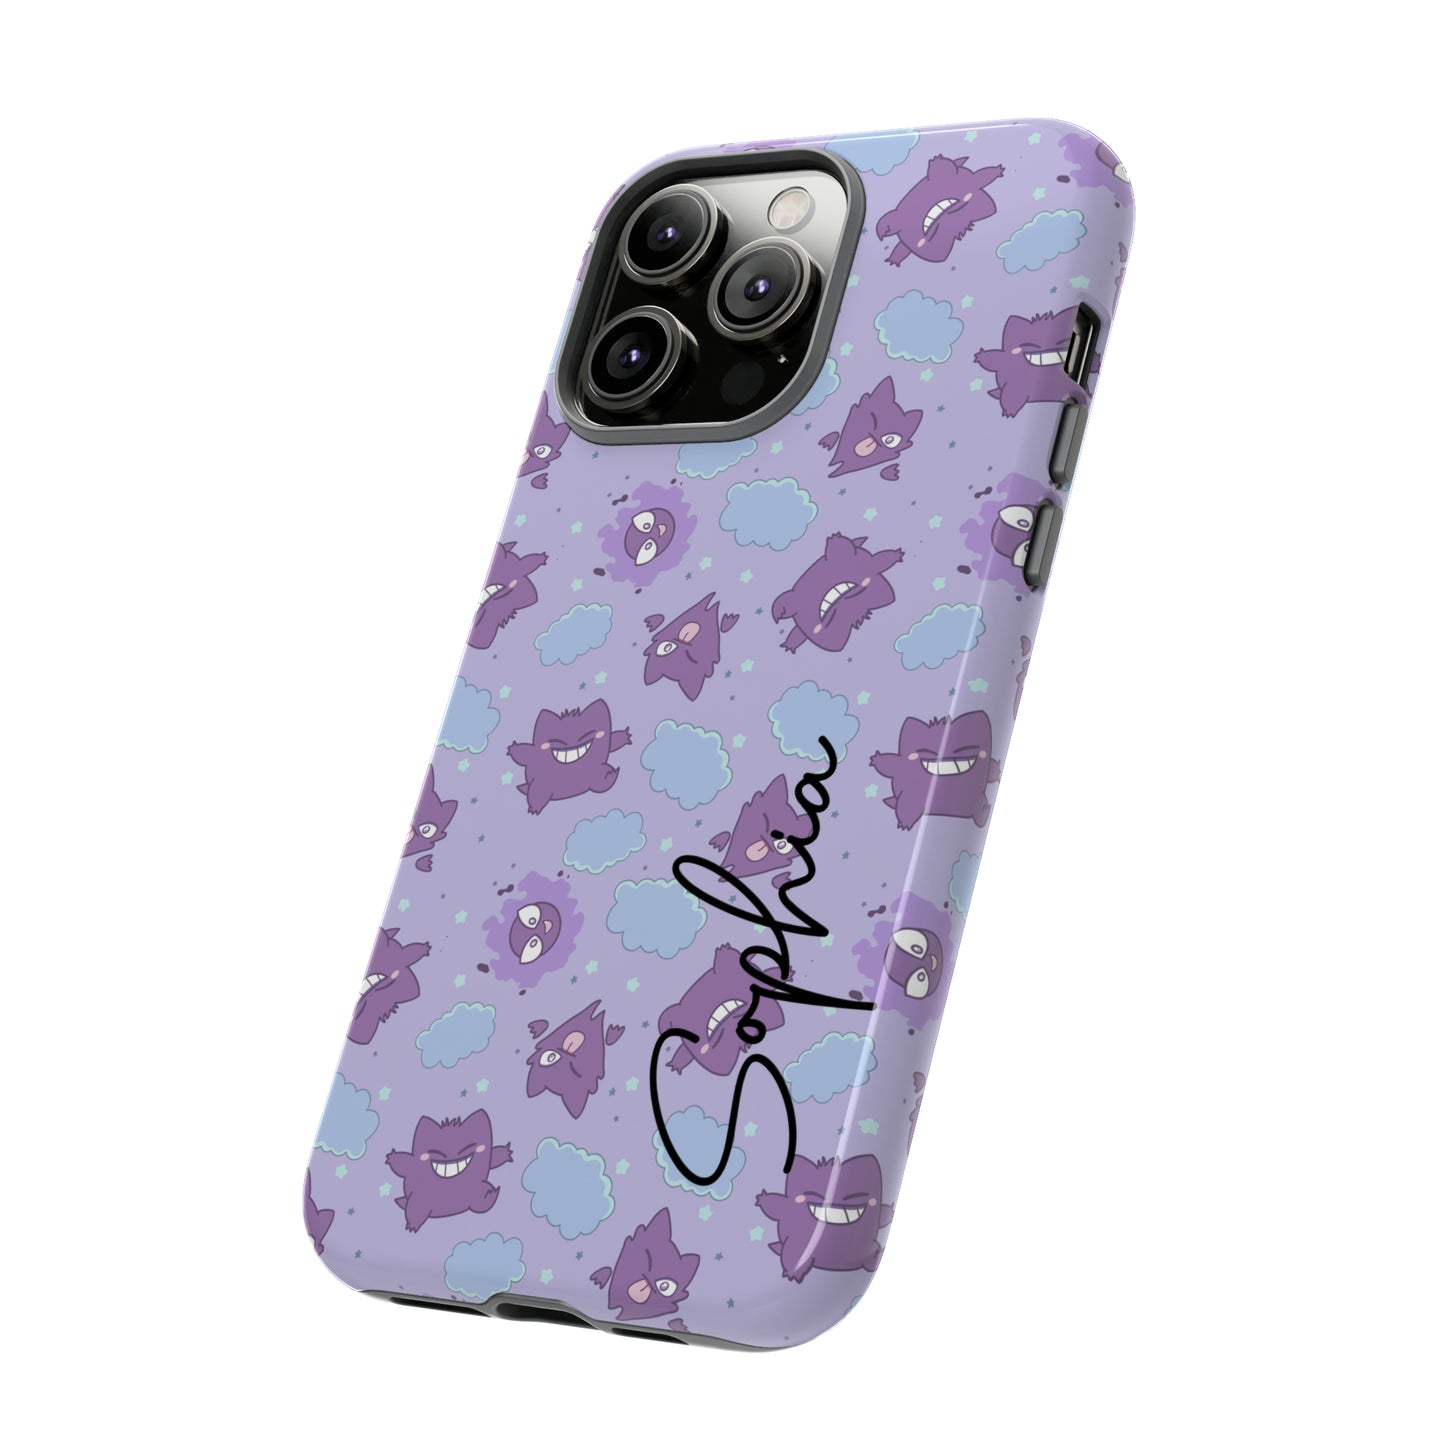 Ghost Pokemon Tough Phone Case for Iphones, Samsungs, and Google phones